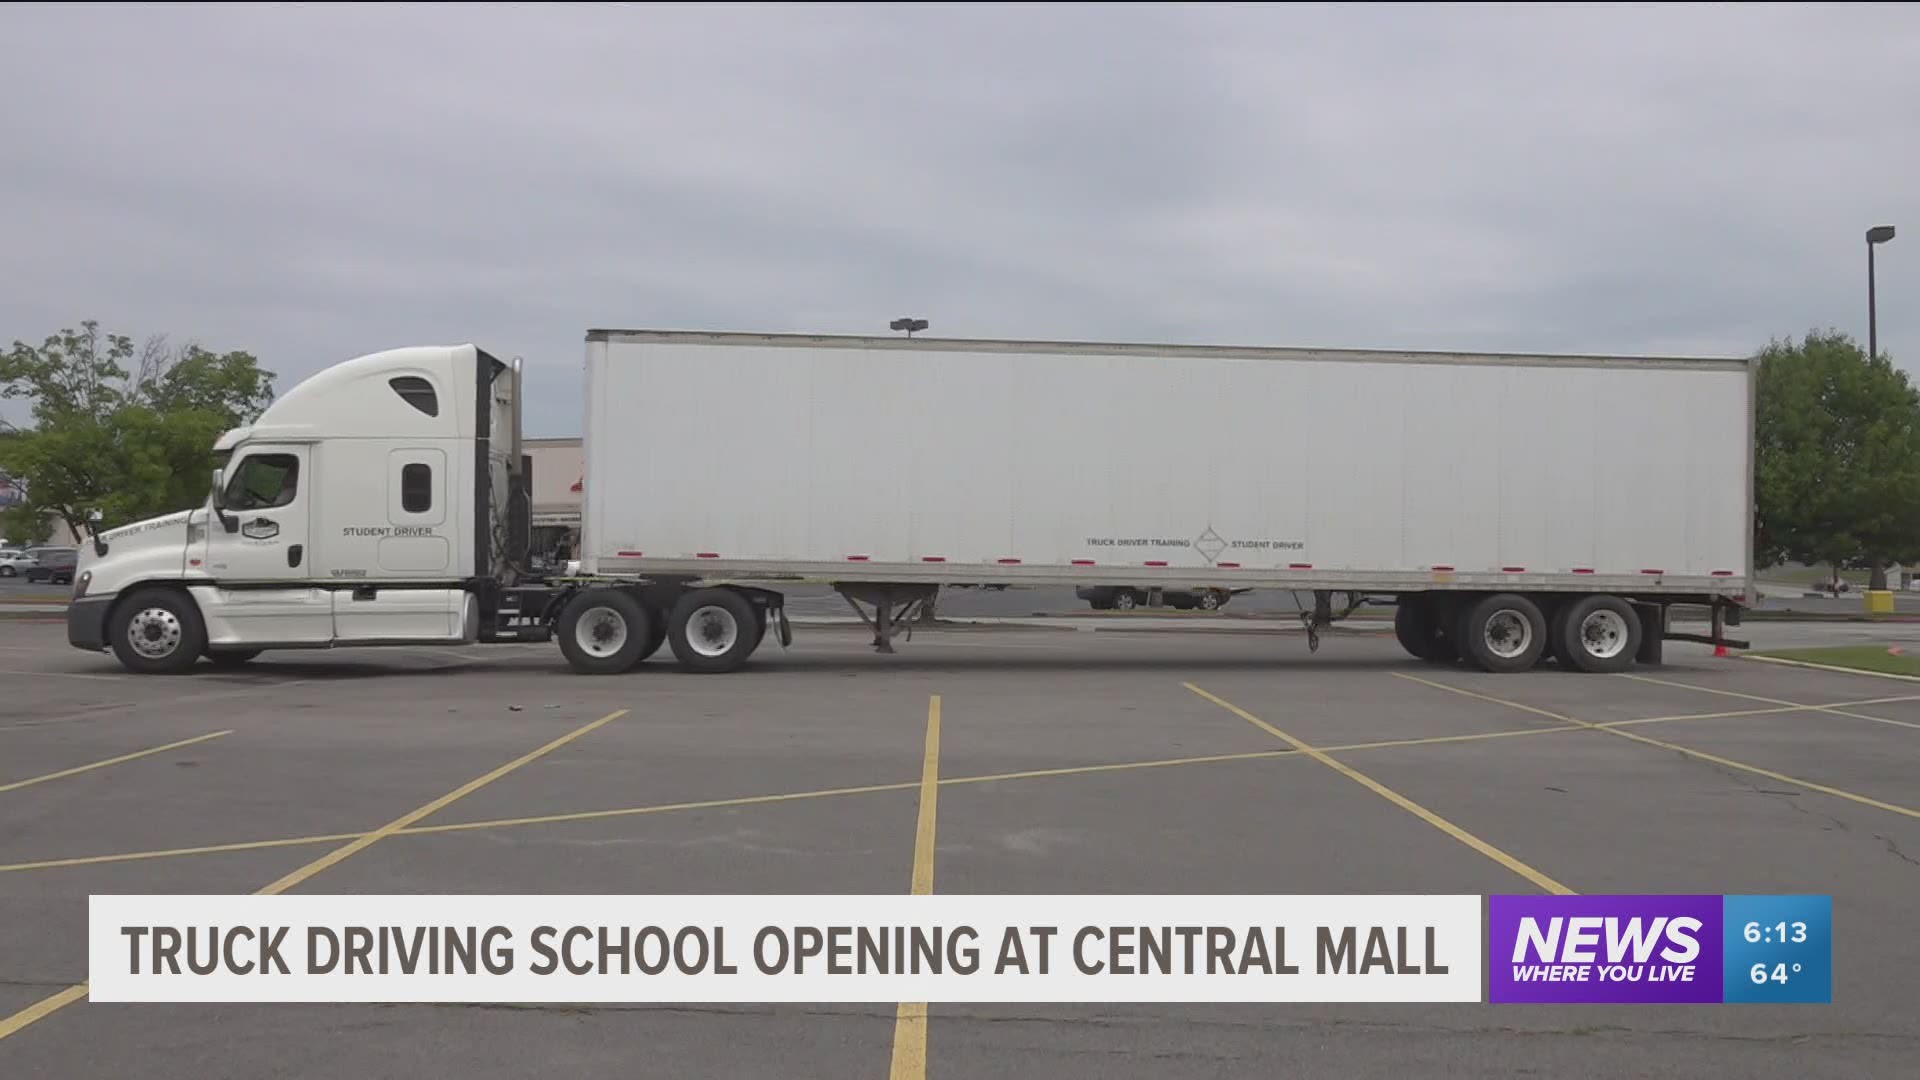 The mall property owners and Dillard’s management granted approval for the school using the portion of the northeast portion of the parking lot.